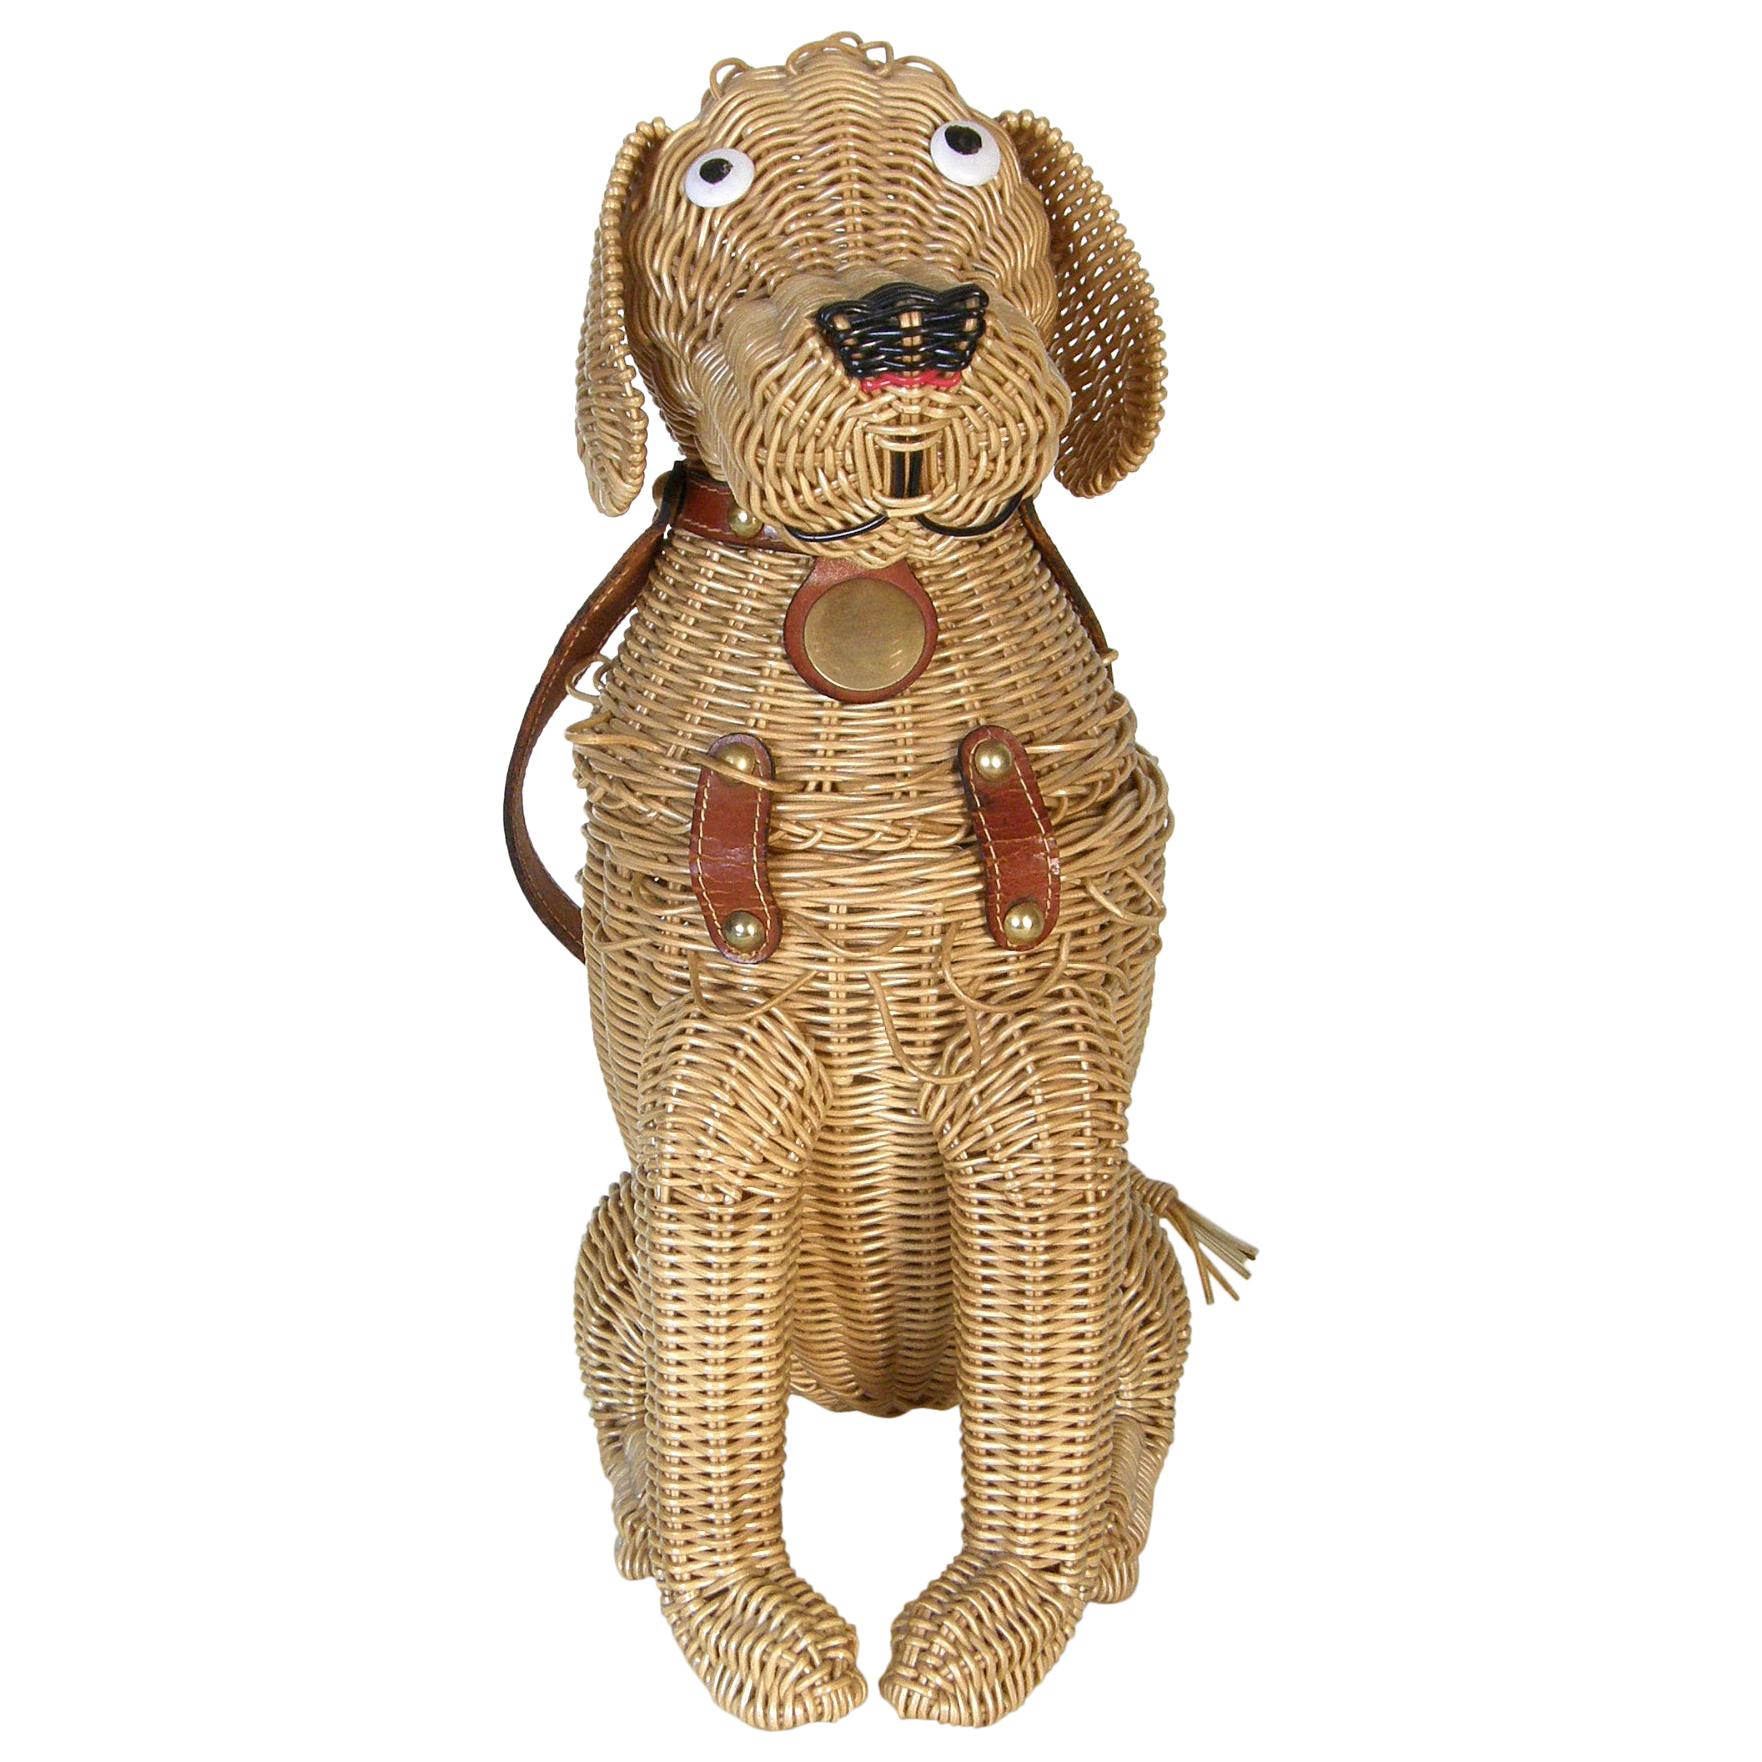 If your apartment doesn't allow pets, consider this ~insanely adorable~  Thom Browne dog purse